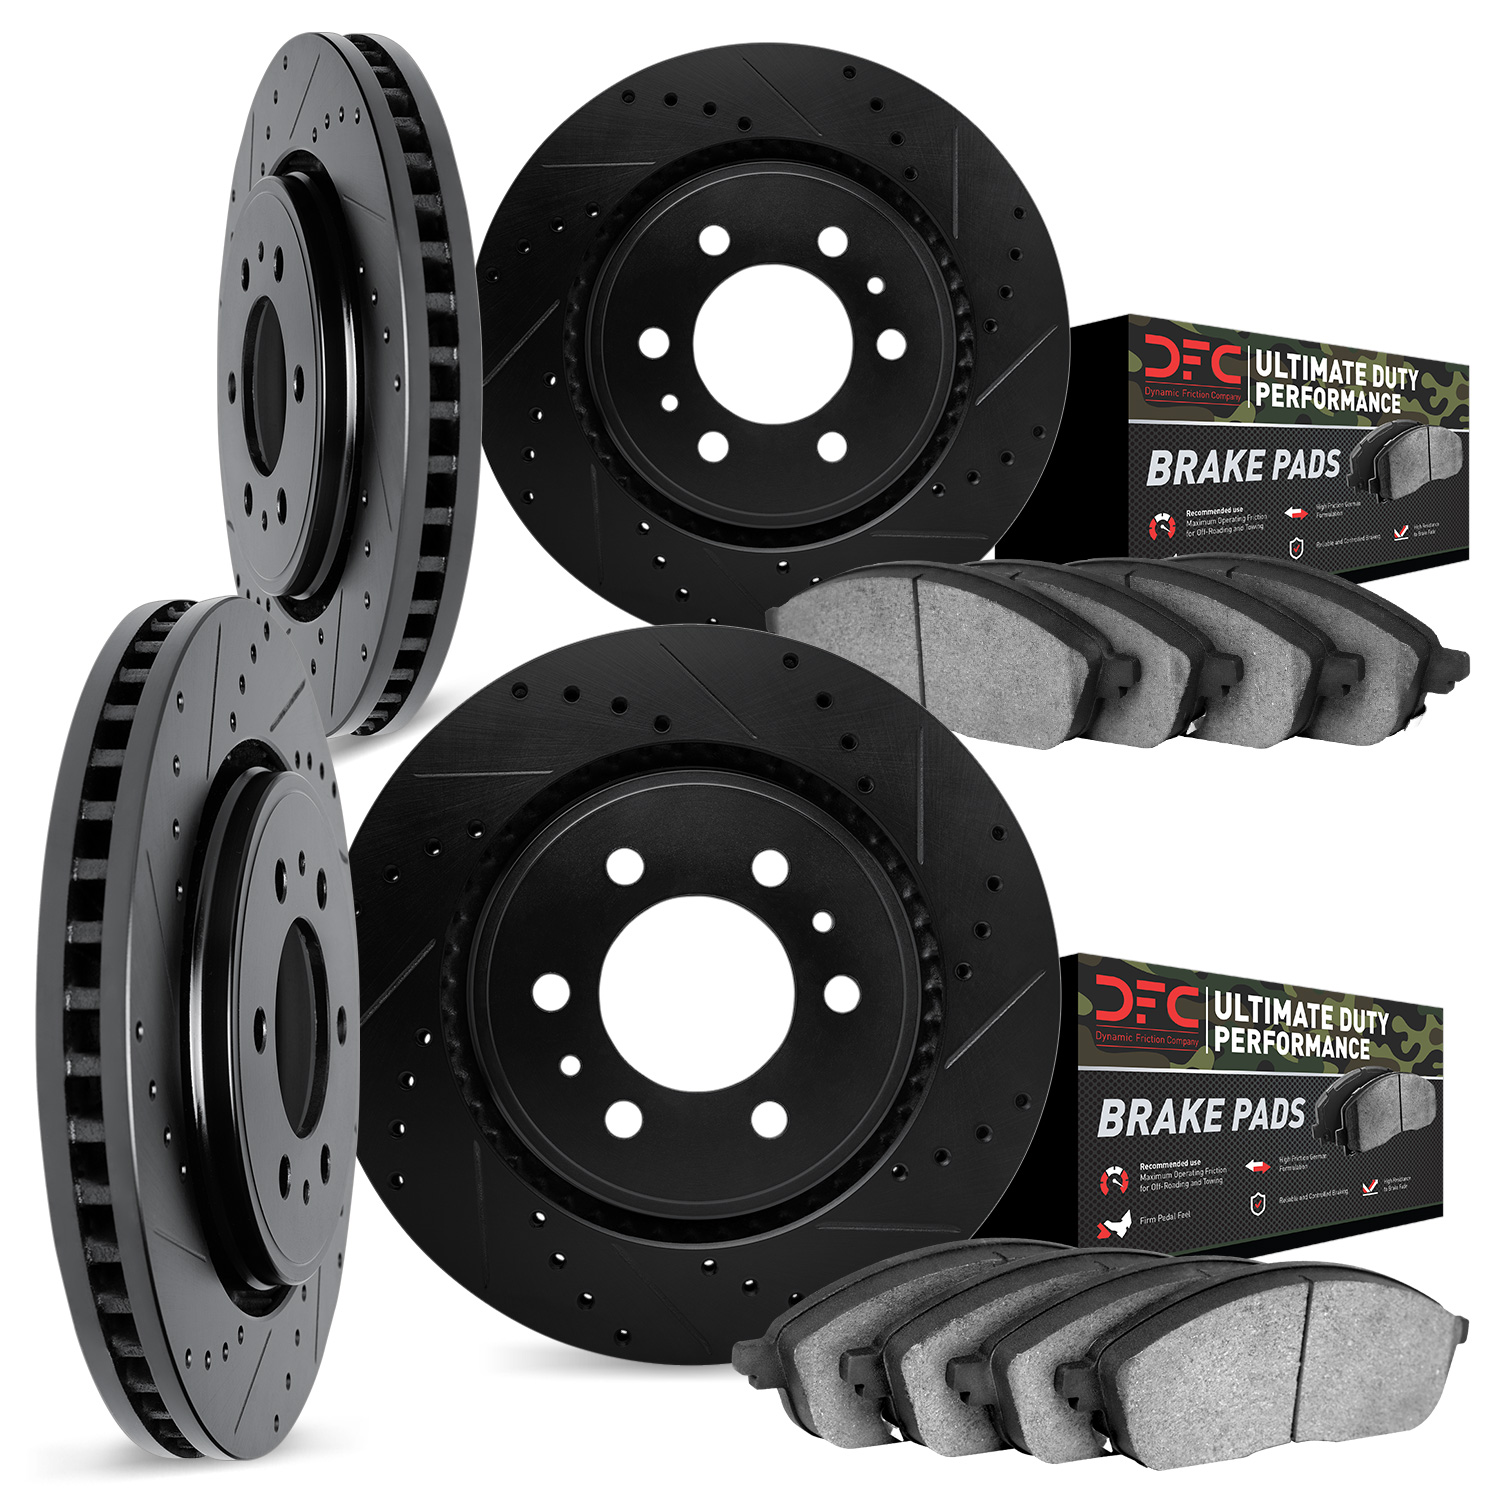 8404-54050 Drilled/Slotted Brake Rotors with Ultimate-Duty Brake Pads Kit [Black], 2018-2021 Ford/Lincoln/Mercury/Mazda, Positio